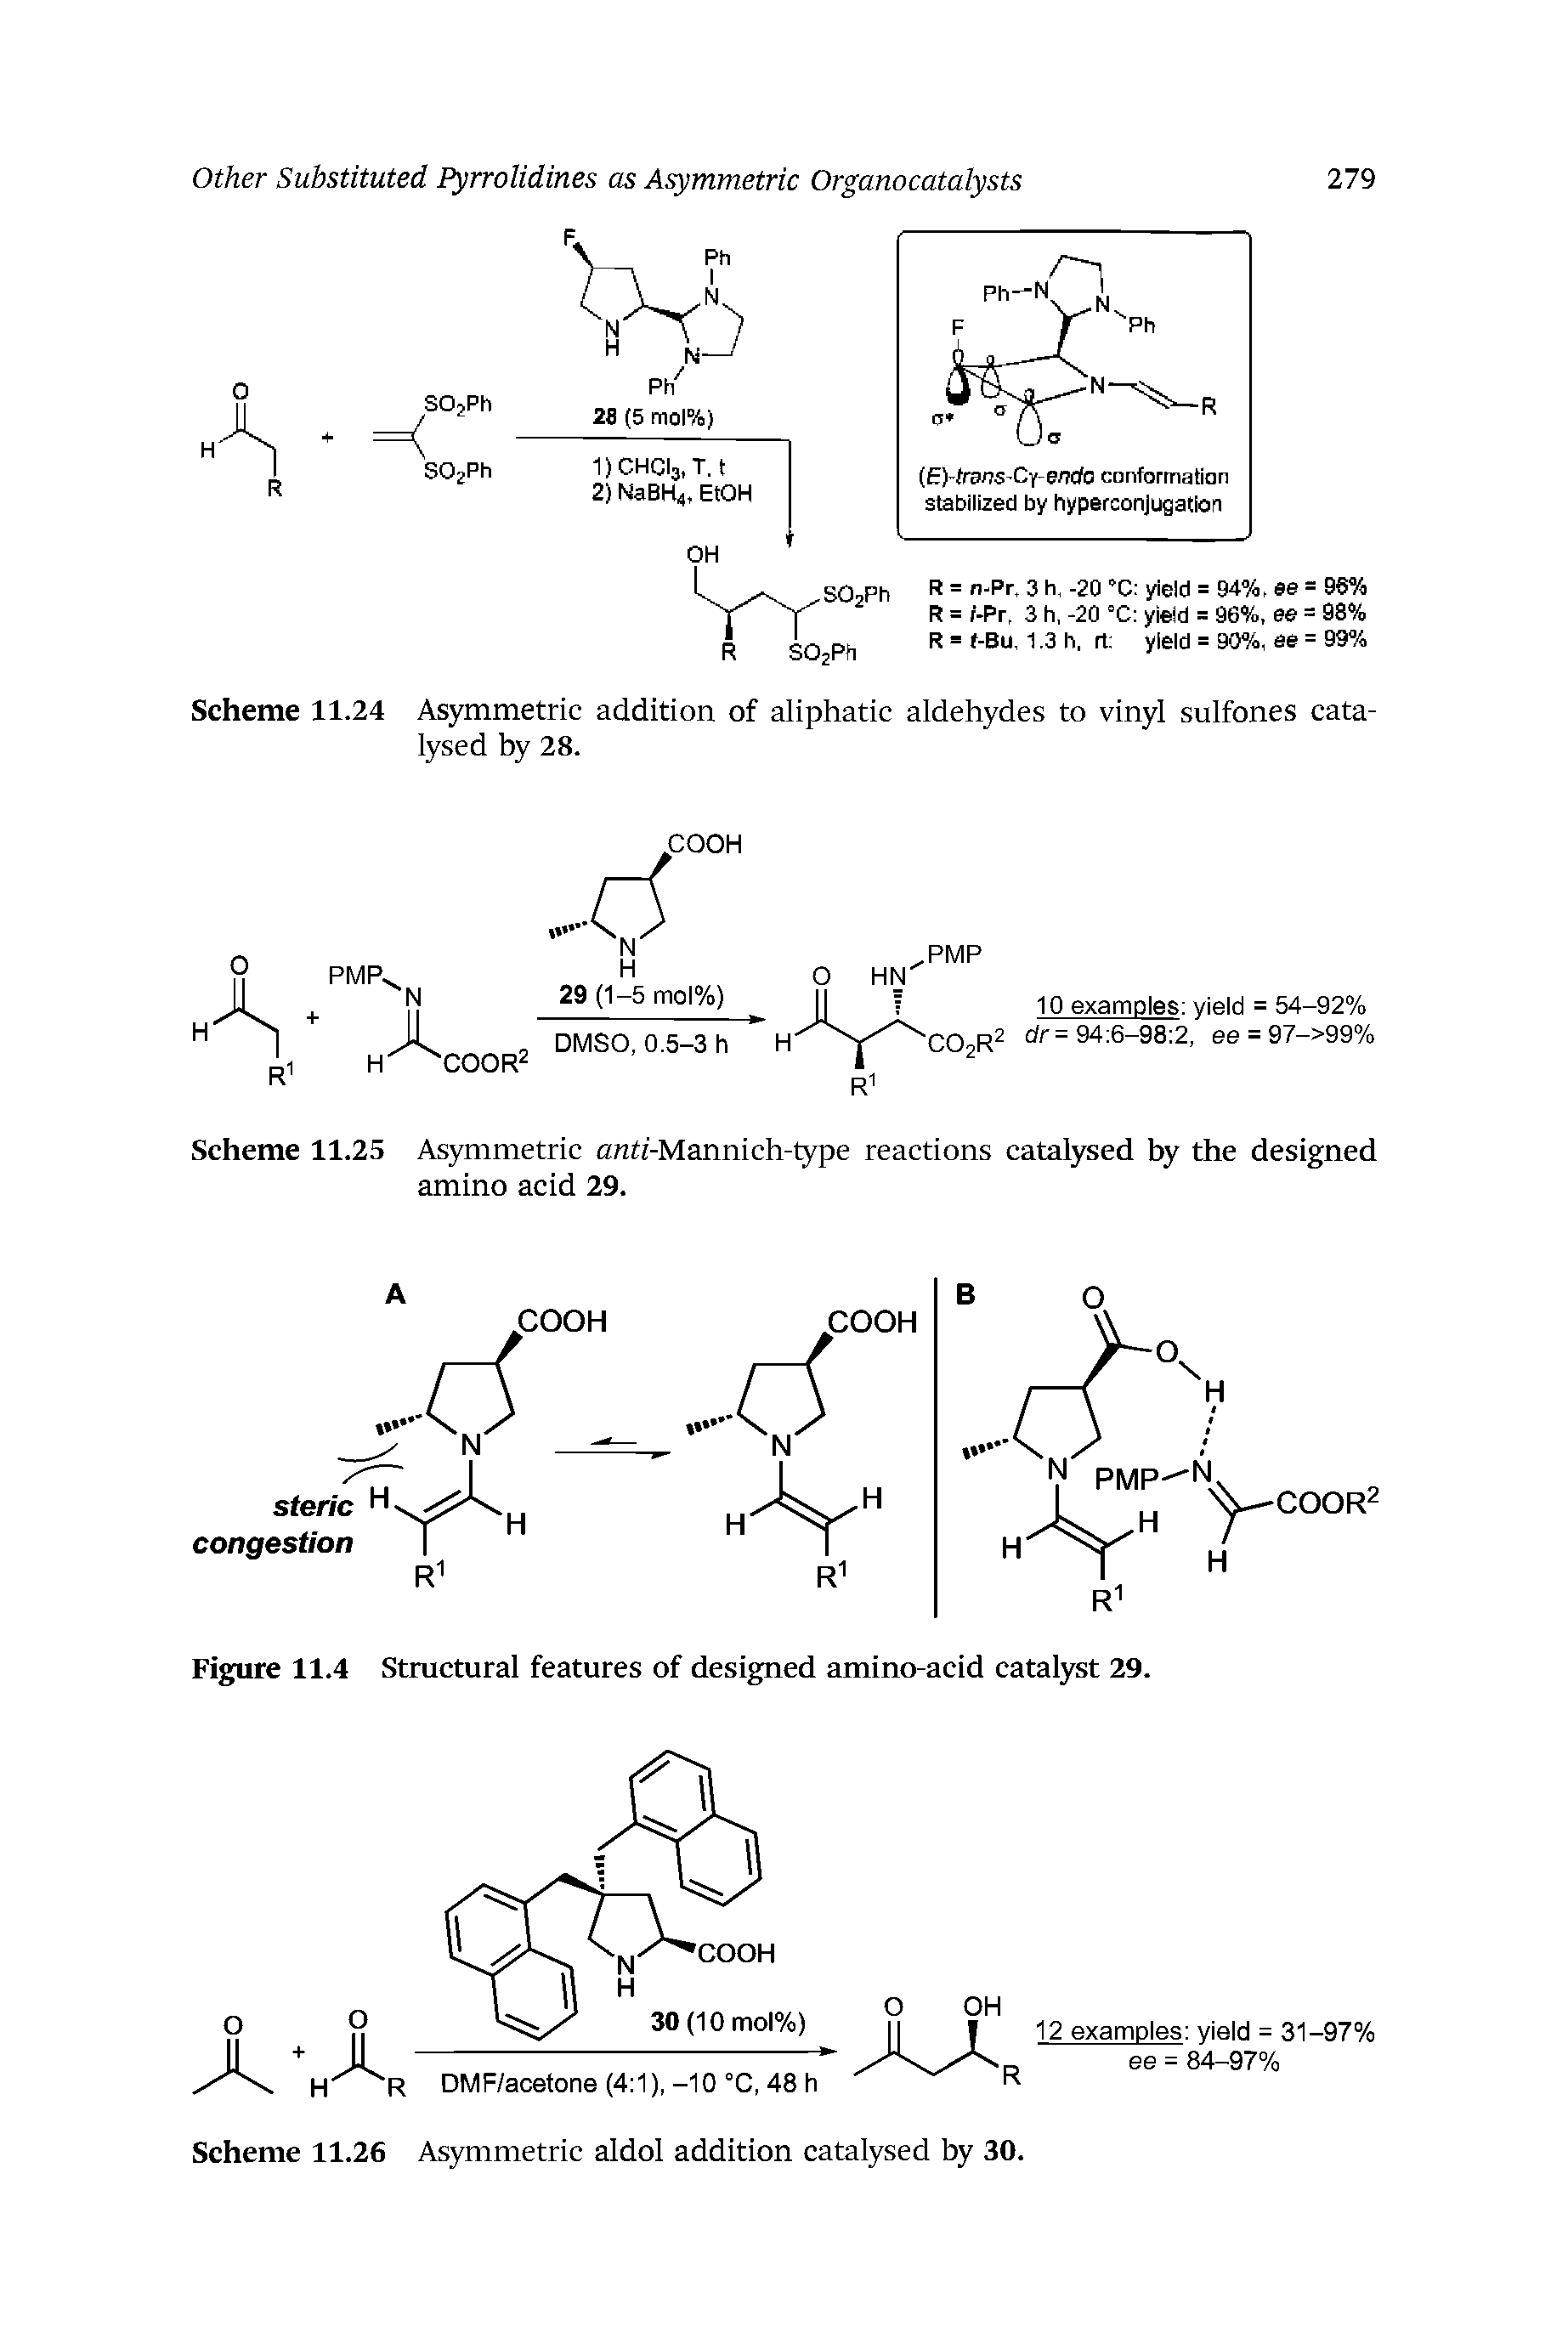 Scheme 11.25 Asymmetric anti-Mannich-type reactions catalysed by the designed amino acid 29.